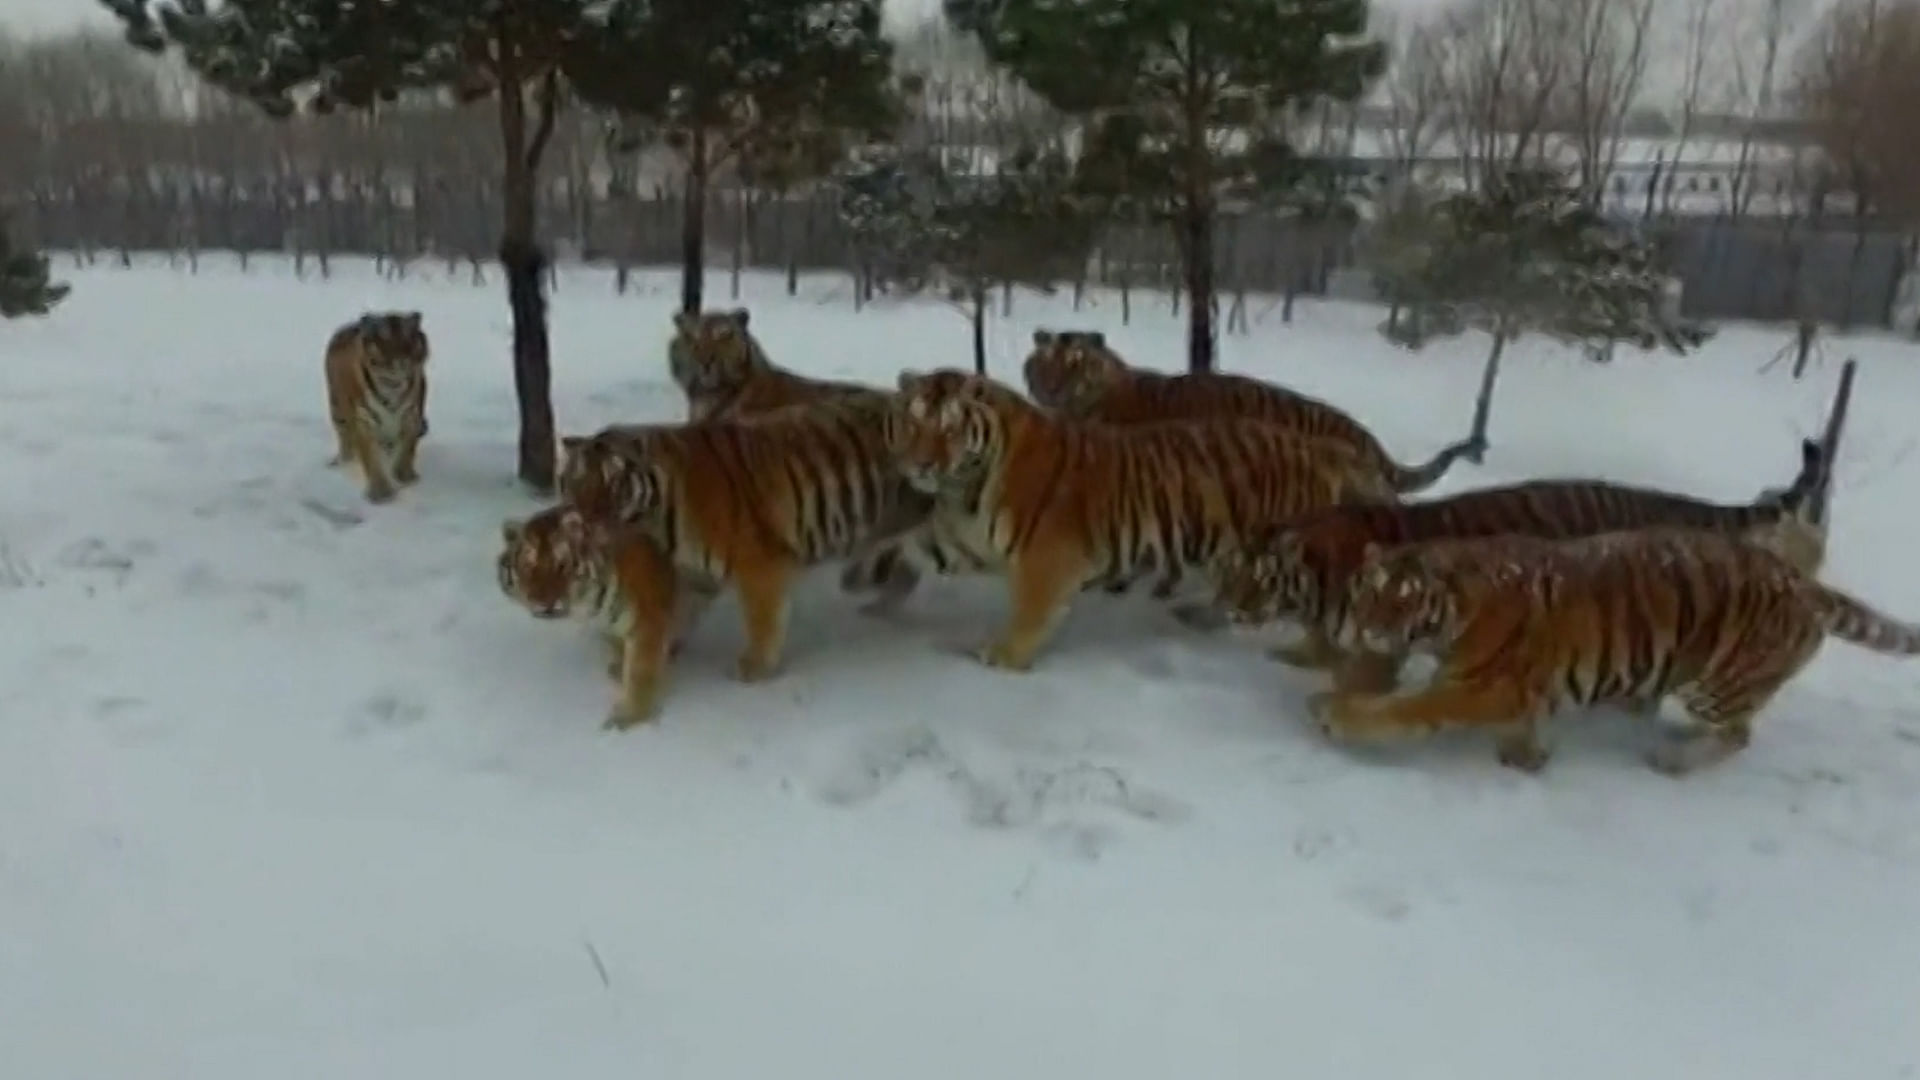 Siberian tigers watch the camera mounted on the drone as it moves. (Photo Courtesy: Newsflare/AP video footage)